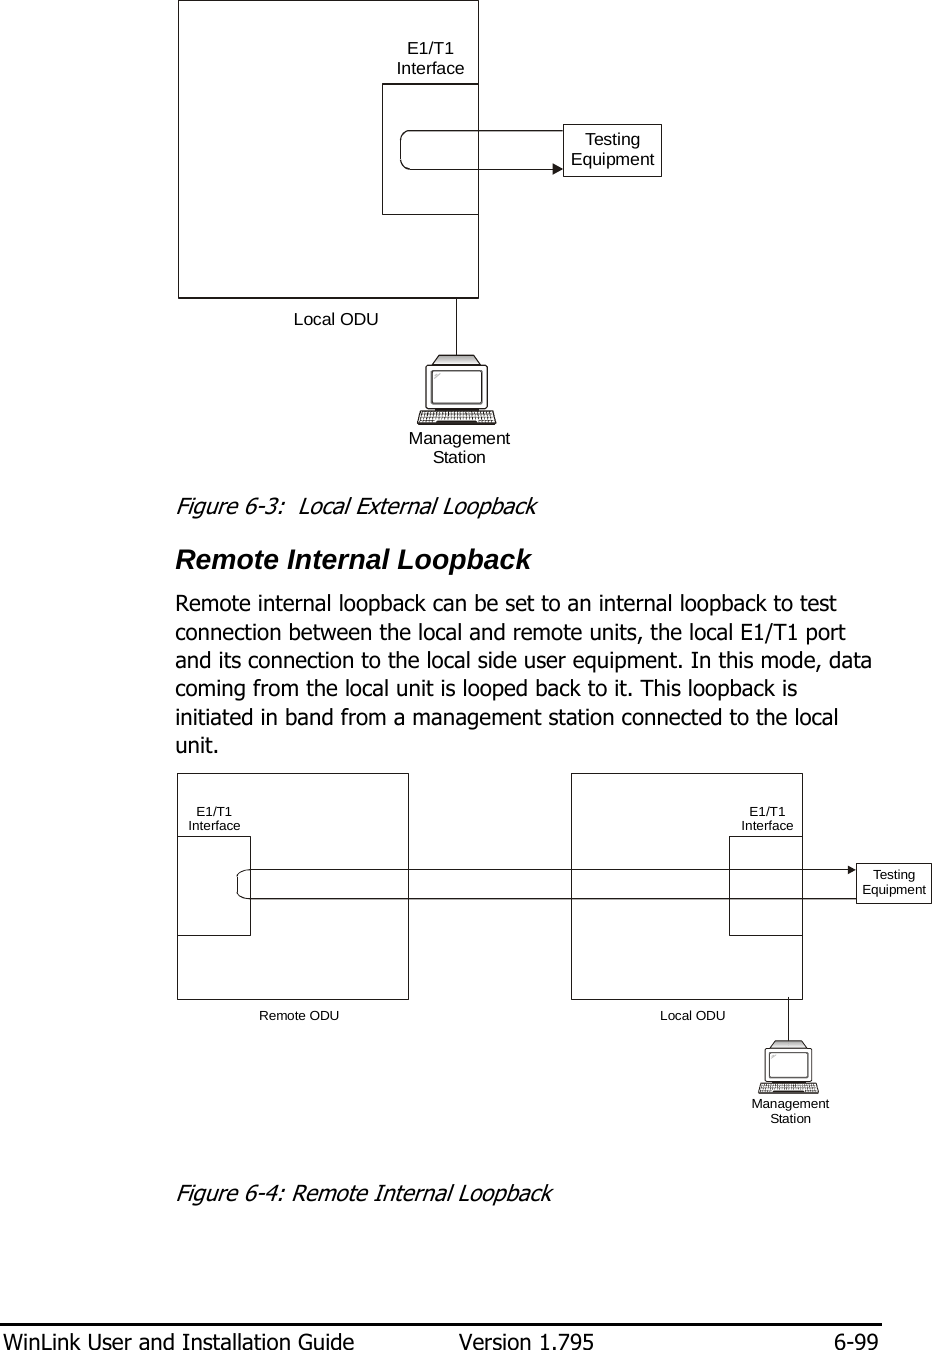  WinLink User and Installation Guide  Version 1.795  6-99  Testi ng Equipment Management StationE1Interface/T1Local ODU Figure  6-3:  Local External Loopback Remote Internal Loopback Remote internal loopback can be set to an internal loopback to test connection between the local and remote units, the local E1/T1 port and its connection to the local side user equipment. In this mode, data coming from the local unit is looped back to it. This loopback is initiated in band from a management station connected to the local unit. Management StationE1/T1Interface E1Interface/T1Testi ng EquipmentRemote ODU Local ODU Figure  6-4: Remote Internal Loopback 